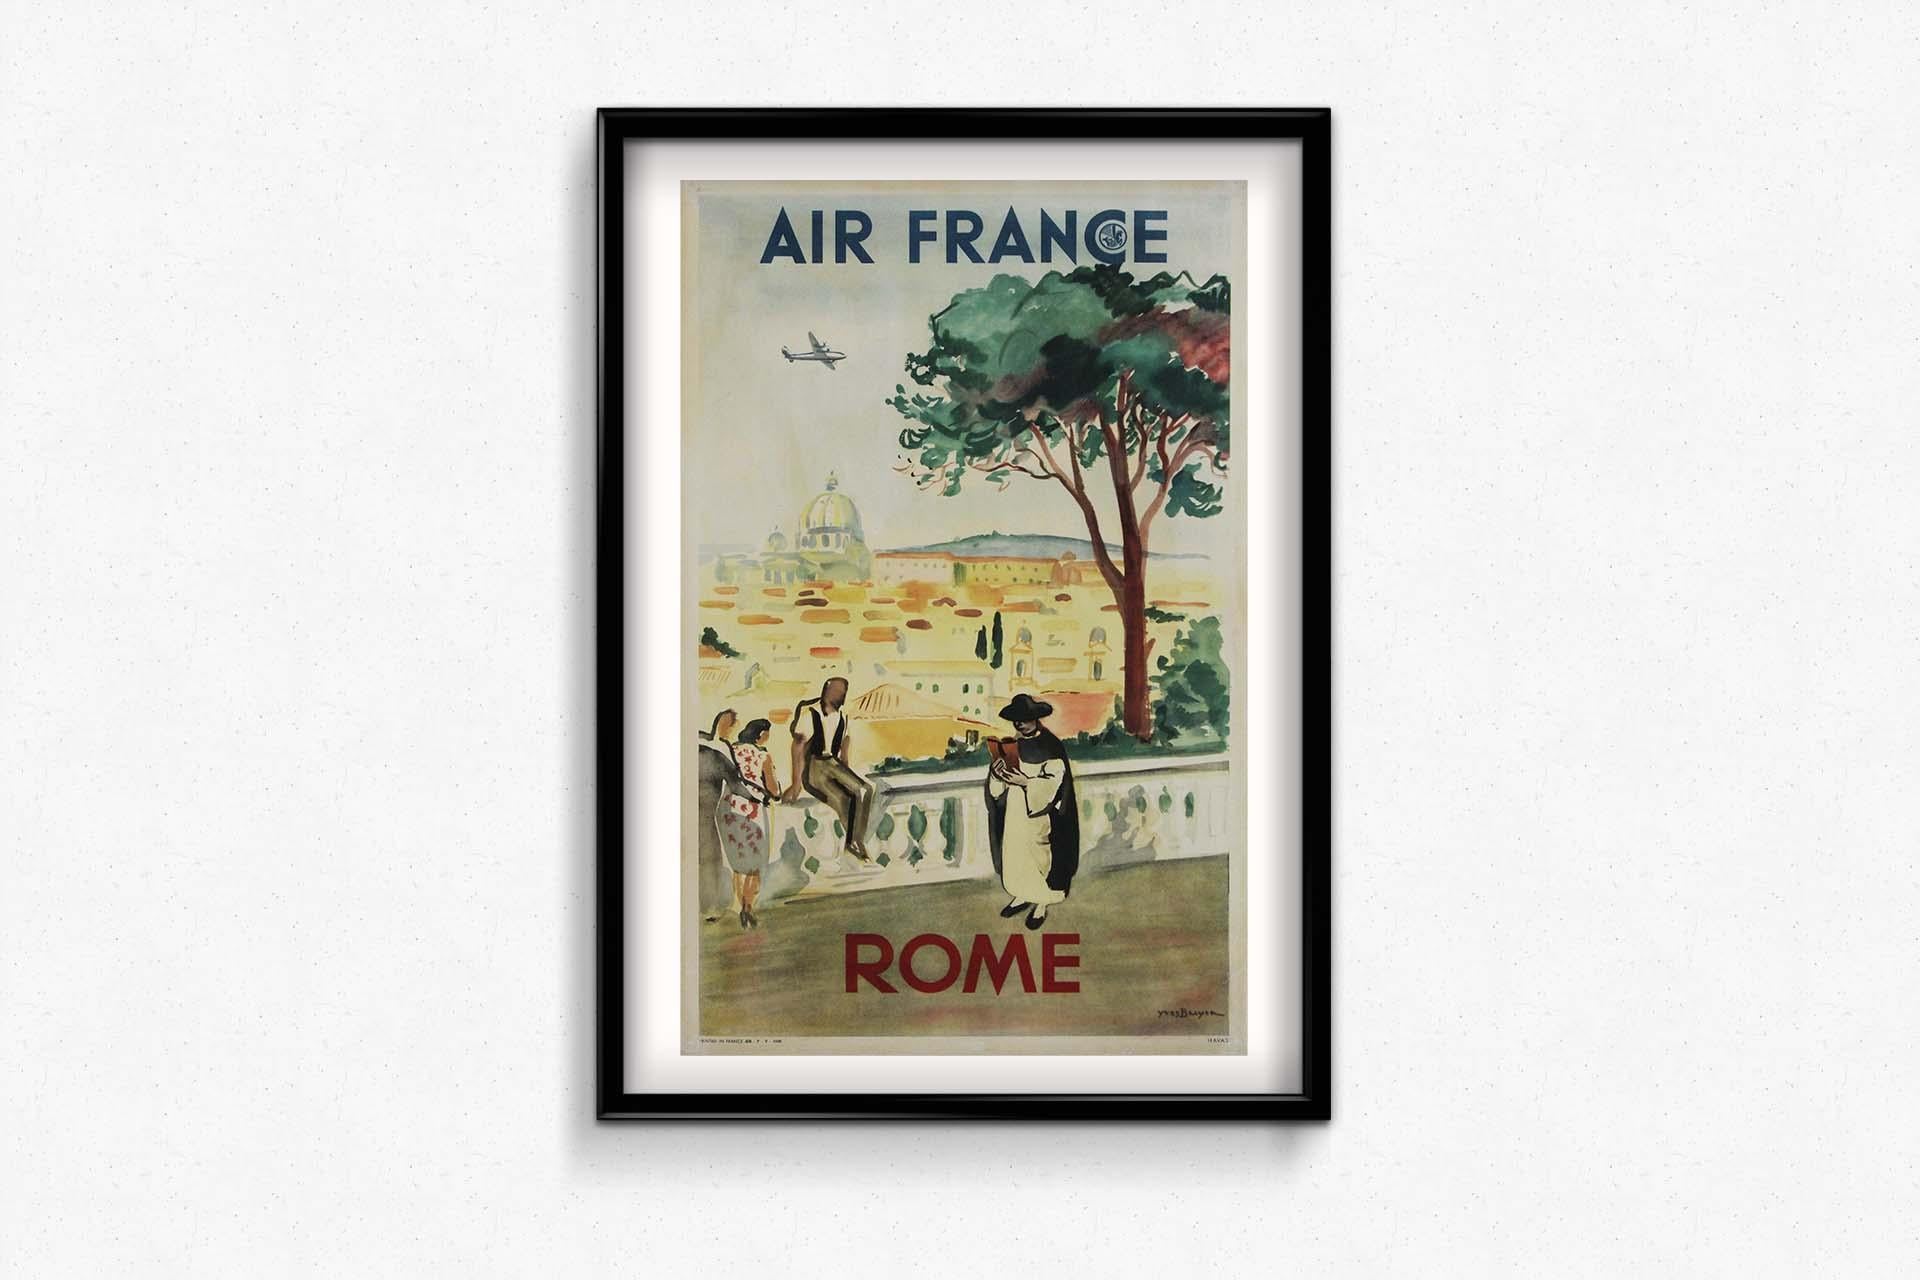 1949 original travel poster by Yves Brayer promoting Air France trips to Rome For Sale 1